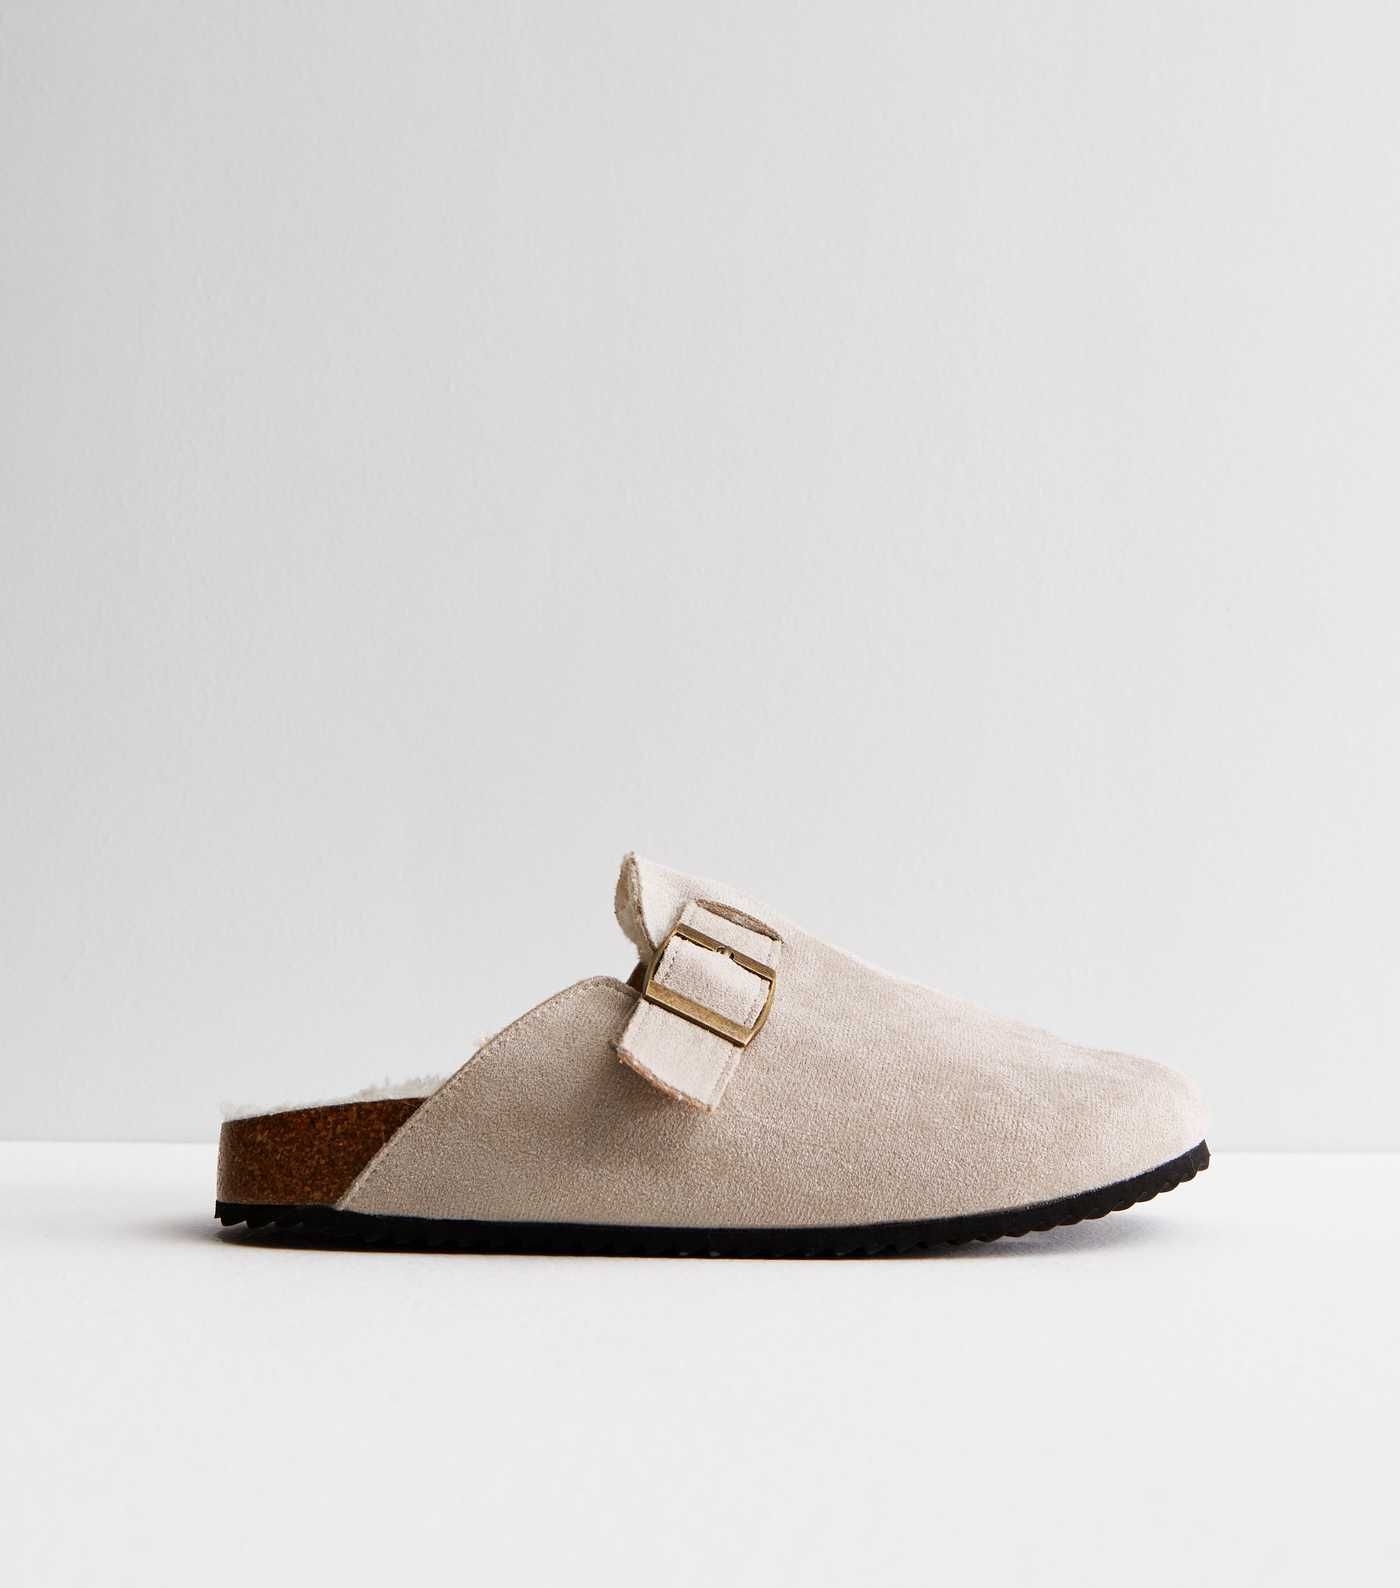 Truffle Grey Suedette Mule Slippers
						
						Add to Saved Items
						Remove from Saved Items | New Look (UK)